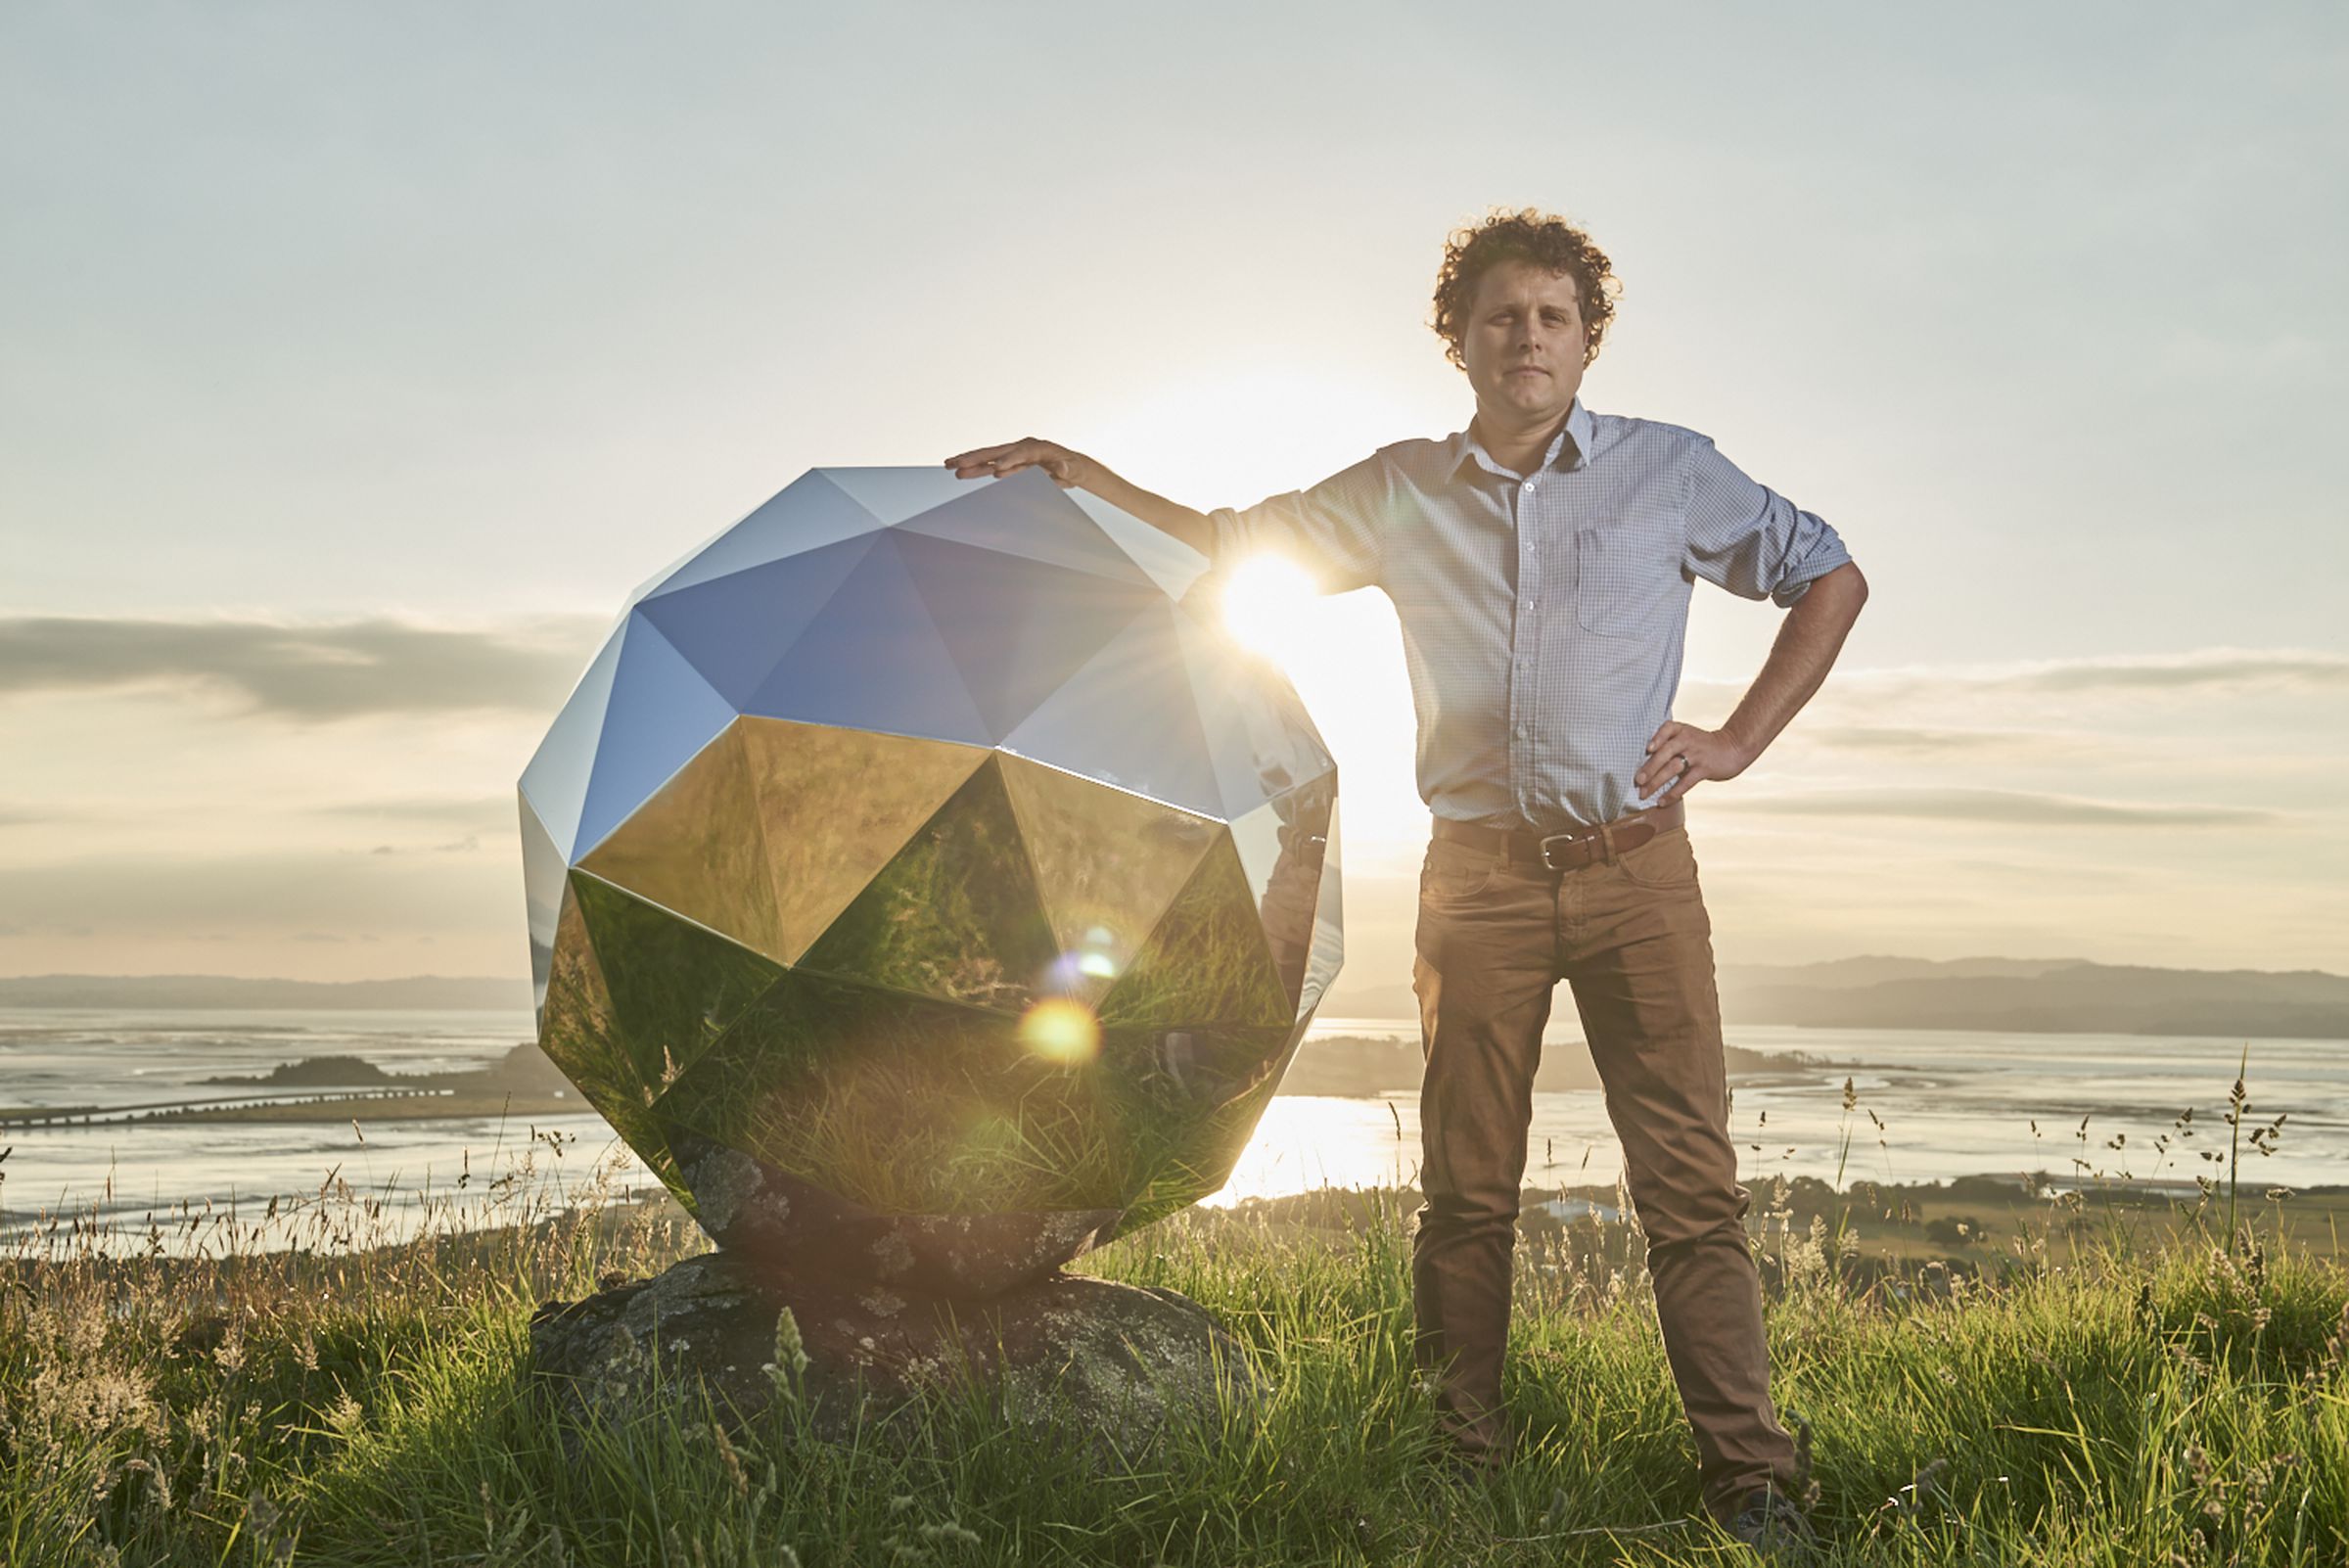 Rocket Lab CEO Peter Beck with the Humanity Star